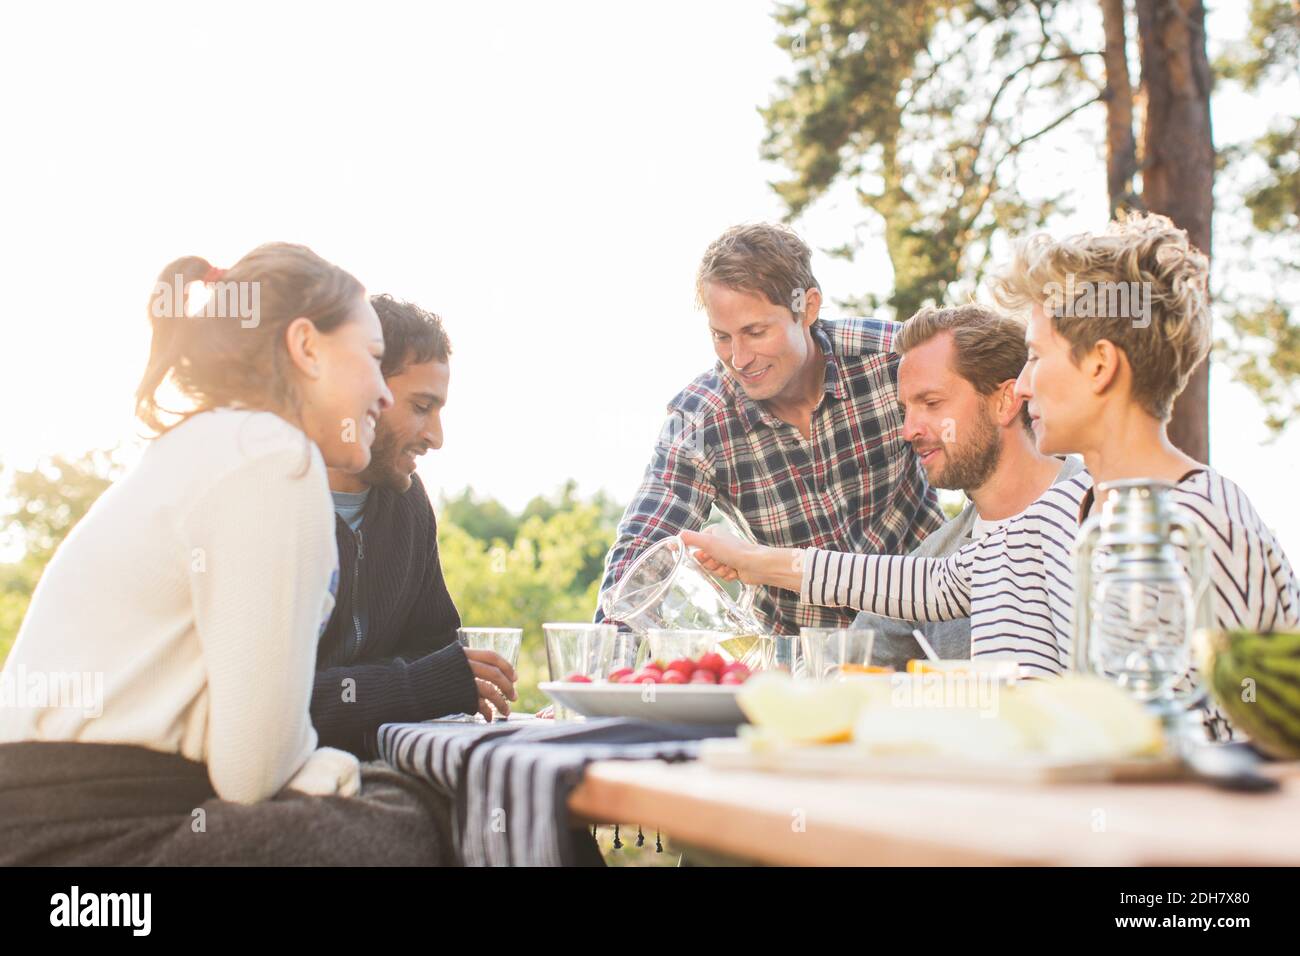 Friends having lunch at picnic table against clear sky Stock Photo